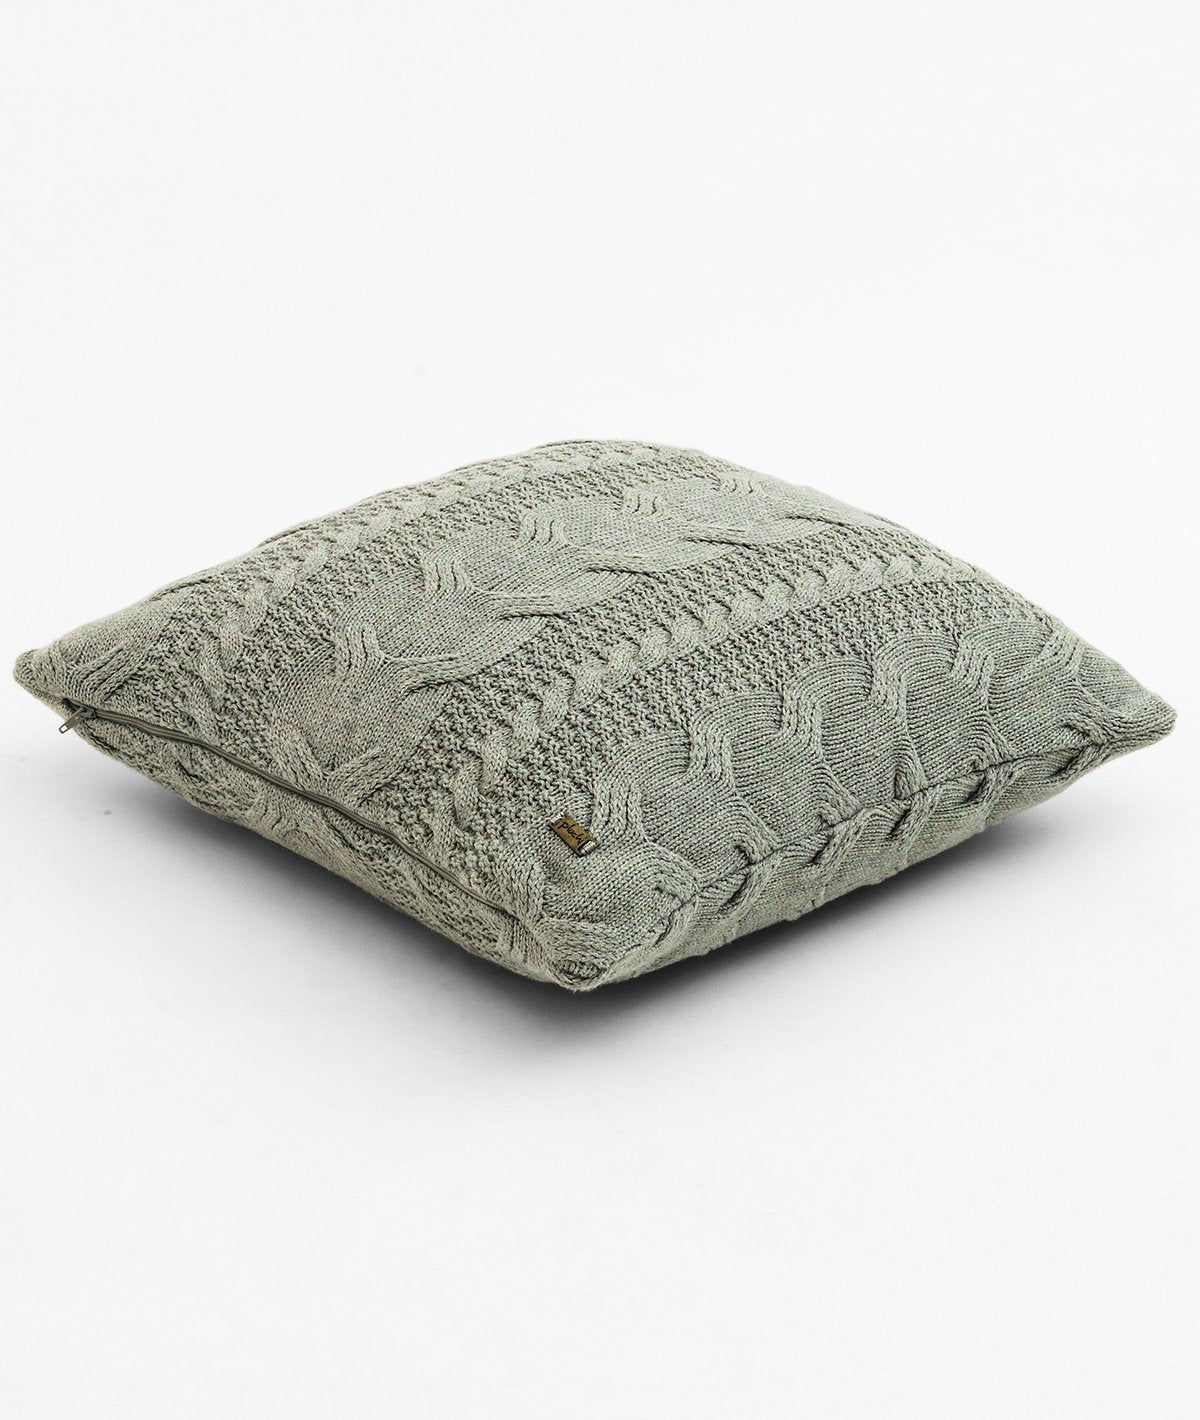 Classical- Grey Cotton Knitted Decorative Cushion Cover (18" x 18")